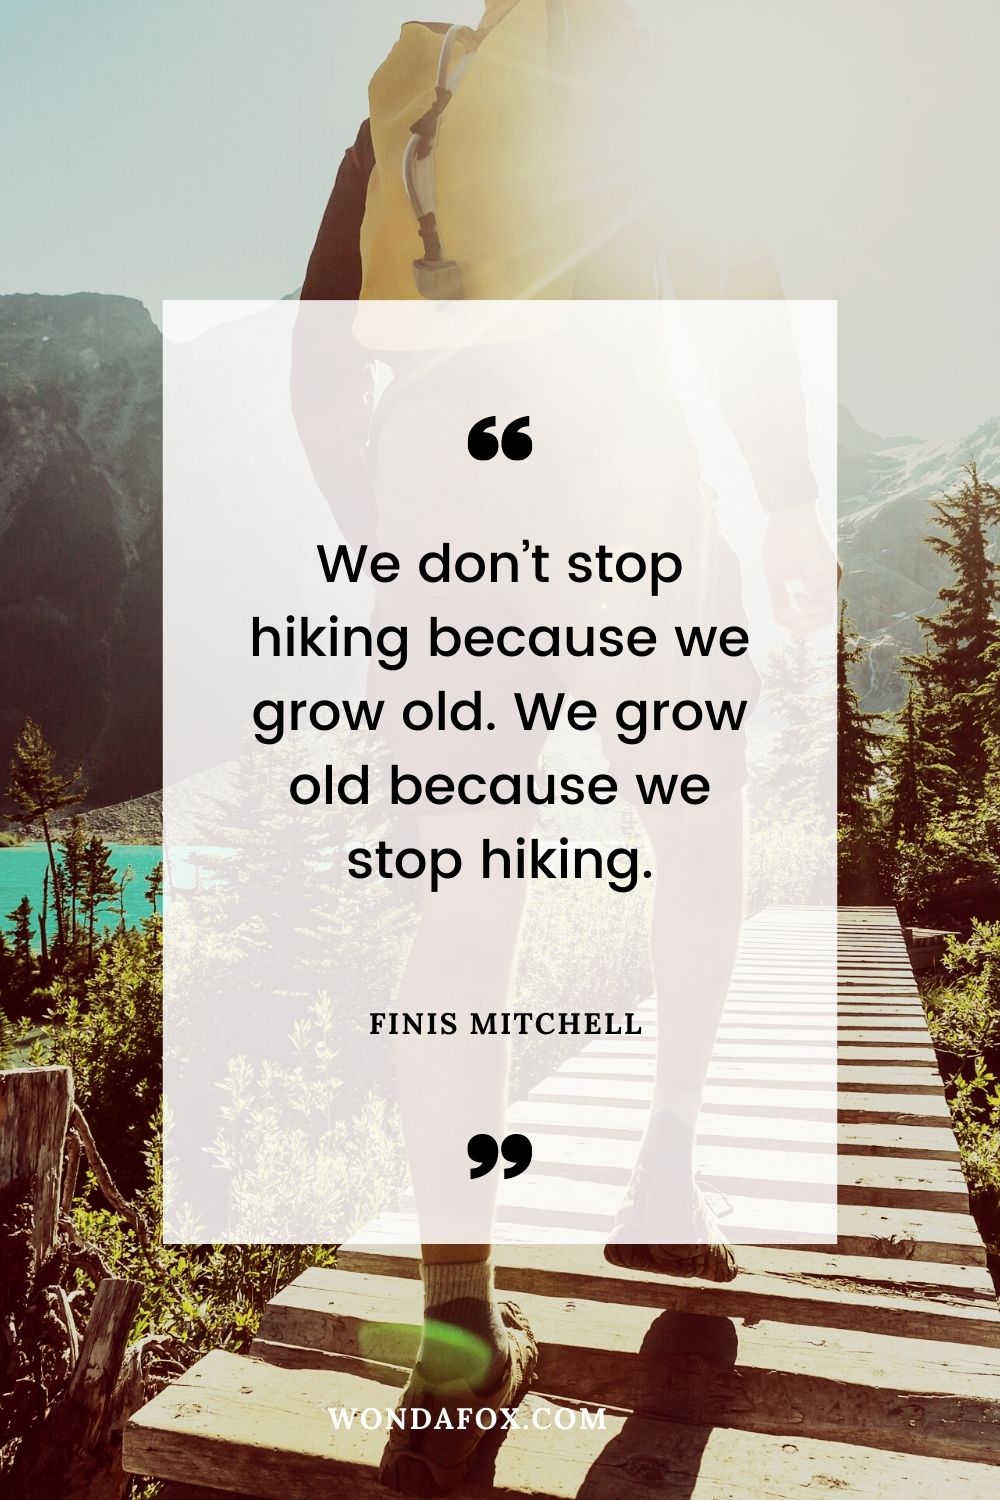 We don’t stop hiking because we grow old. We grow old because we stop hiking.